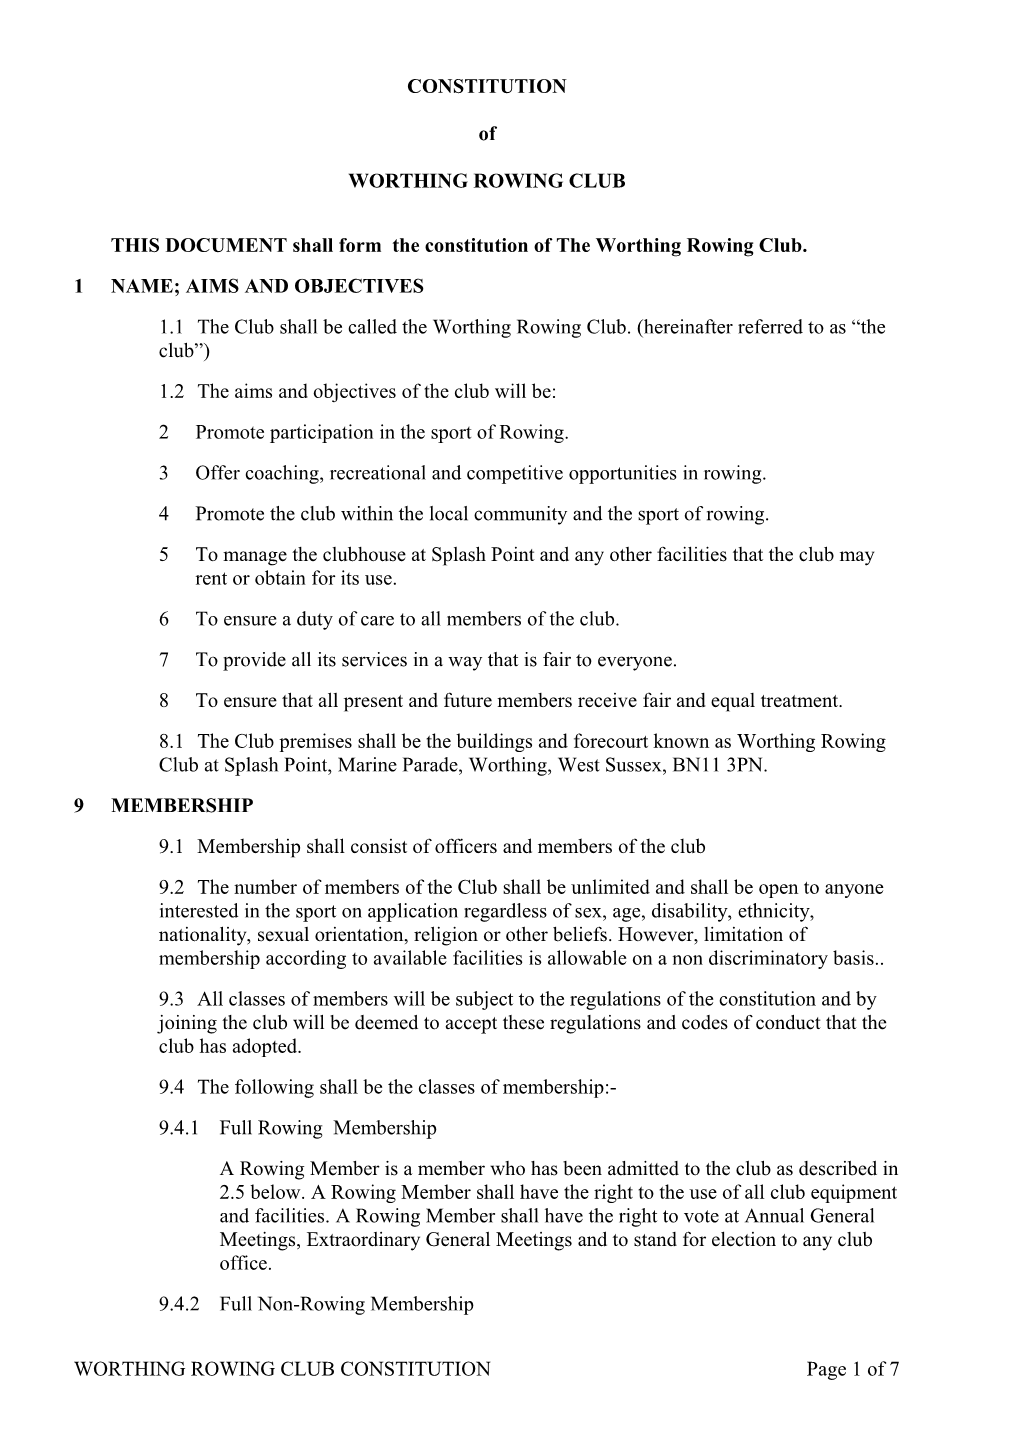 THIS DOCUMENT Shall Form the Constitution of the Worthing Rowing Club